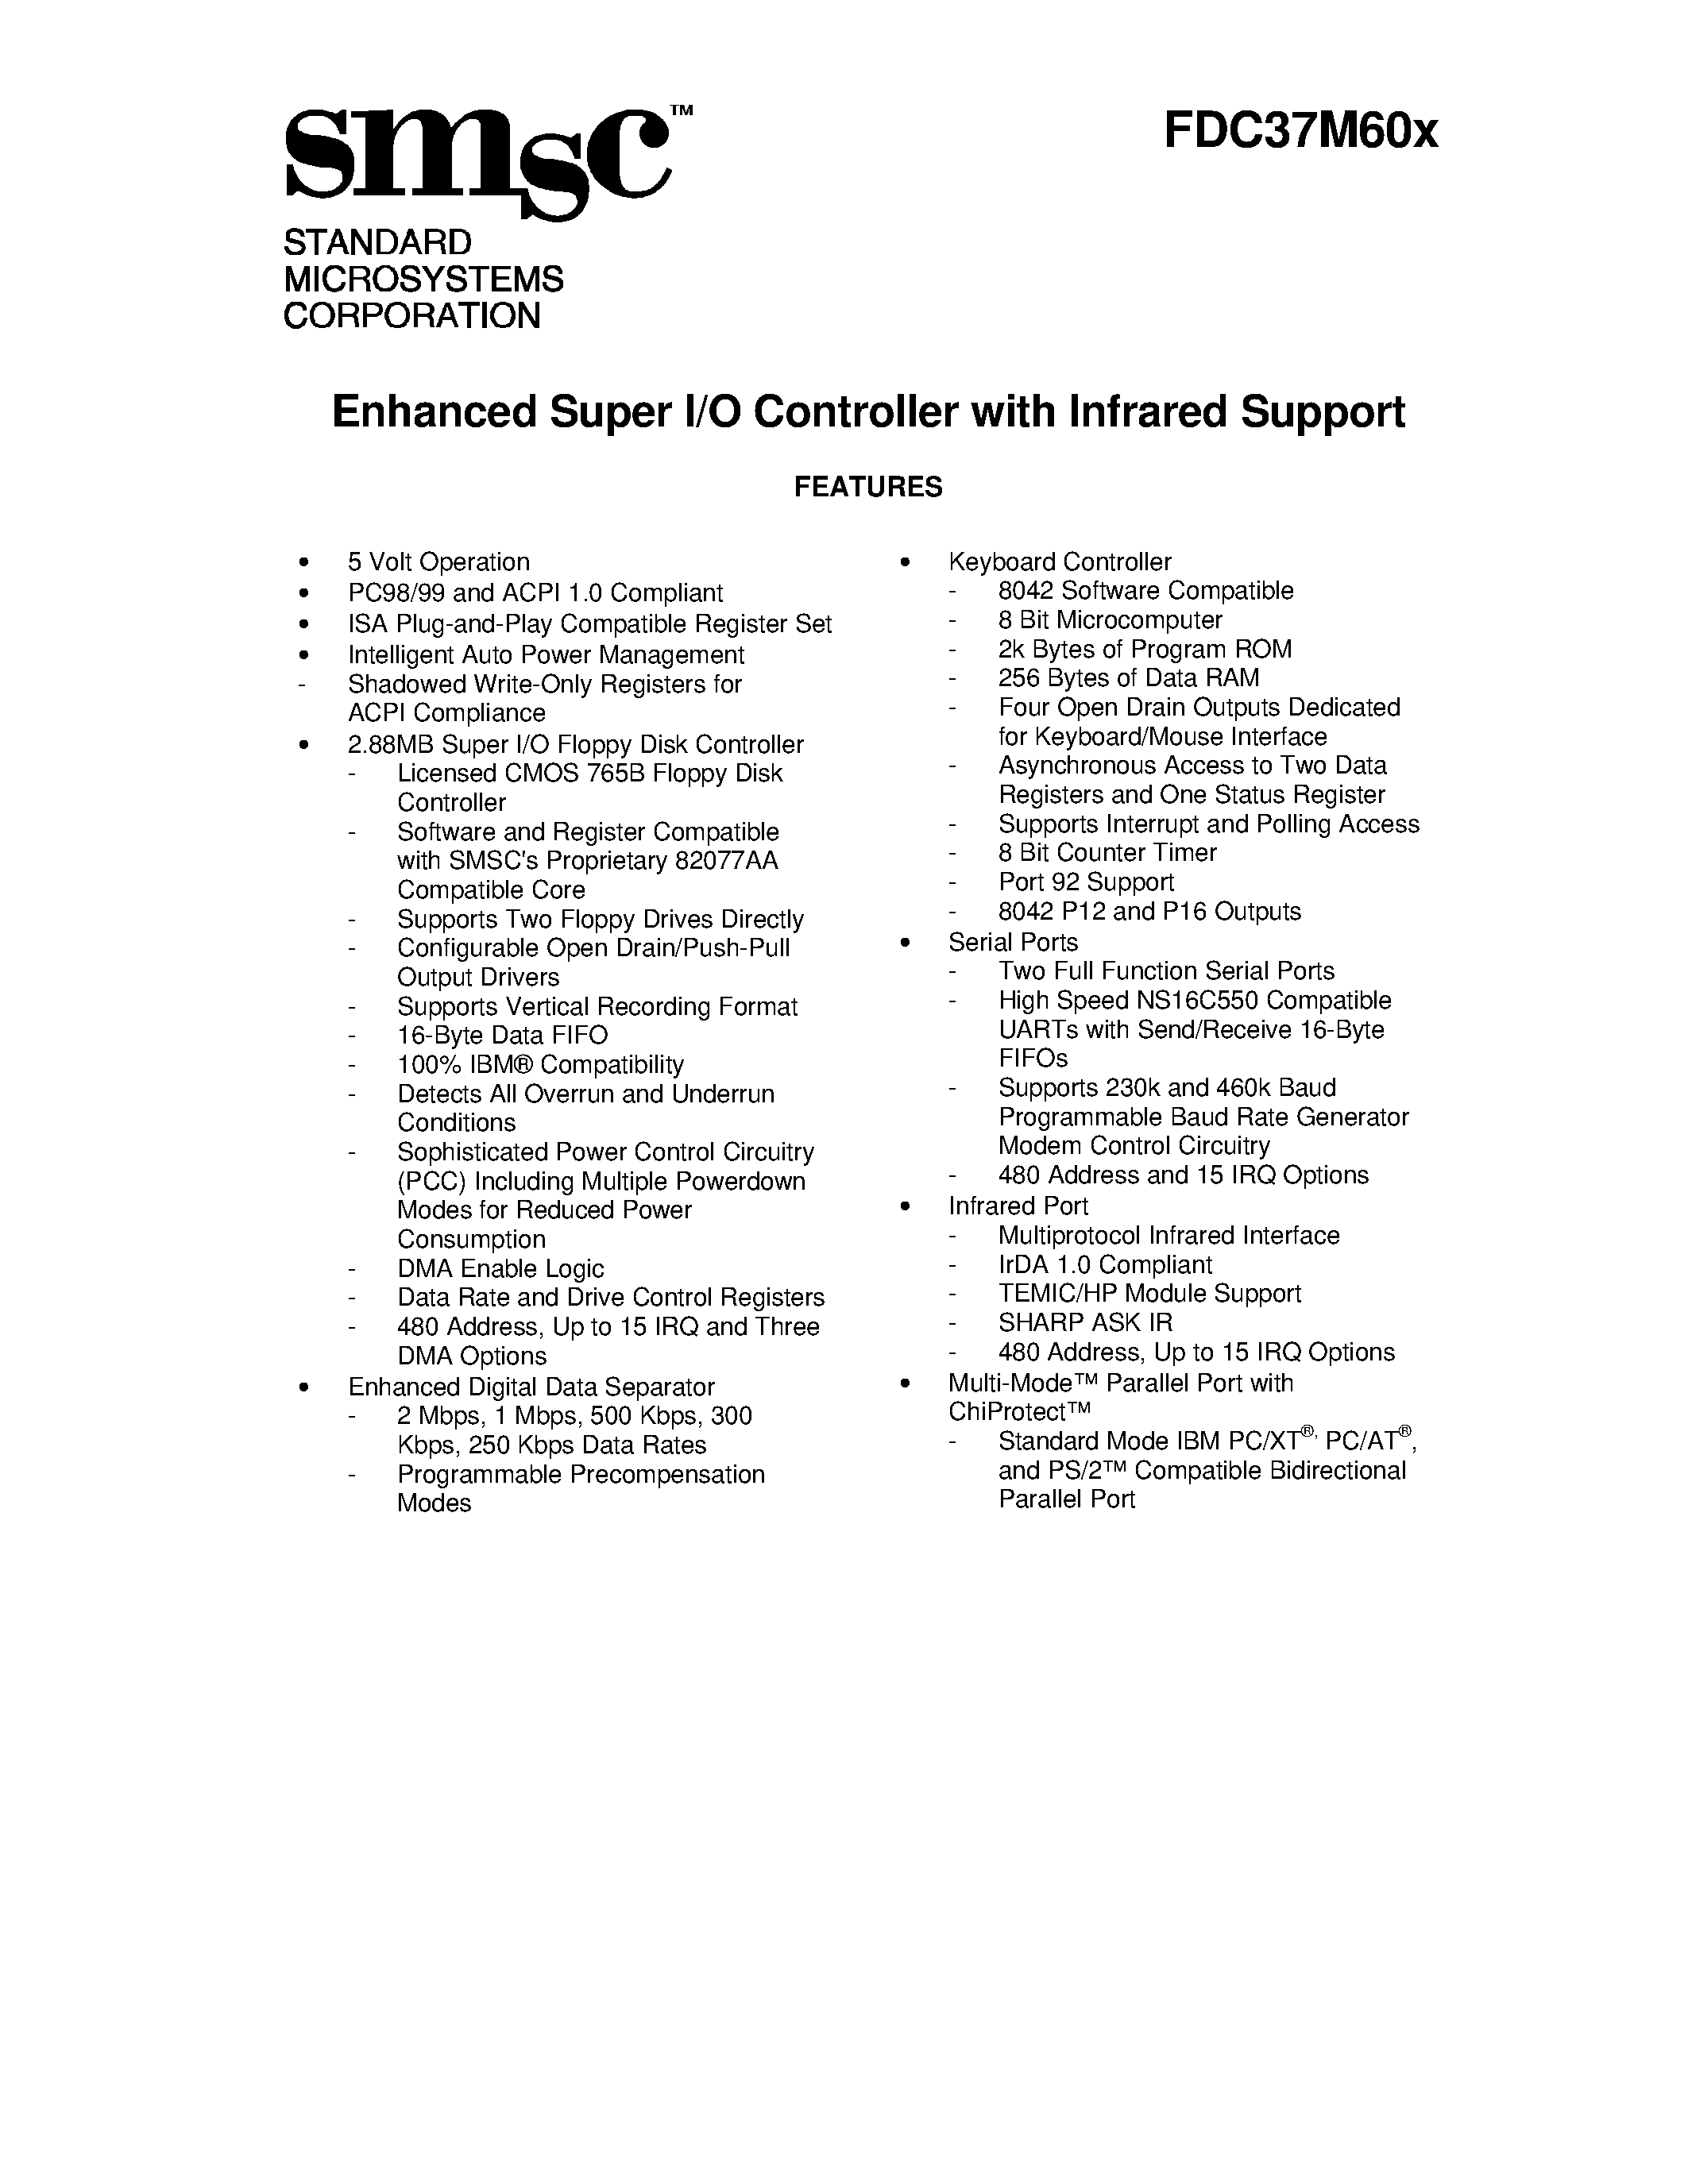 Datasheet FDC37M60X - ENHANCED SUPER I/O CONTROLLER WITH INFRARED SUPPORT page 1